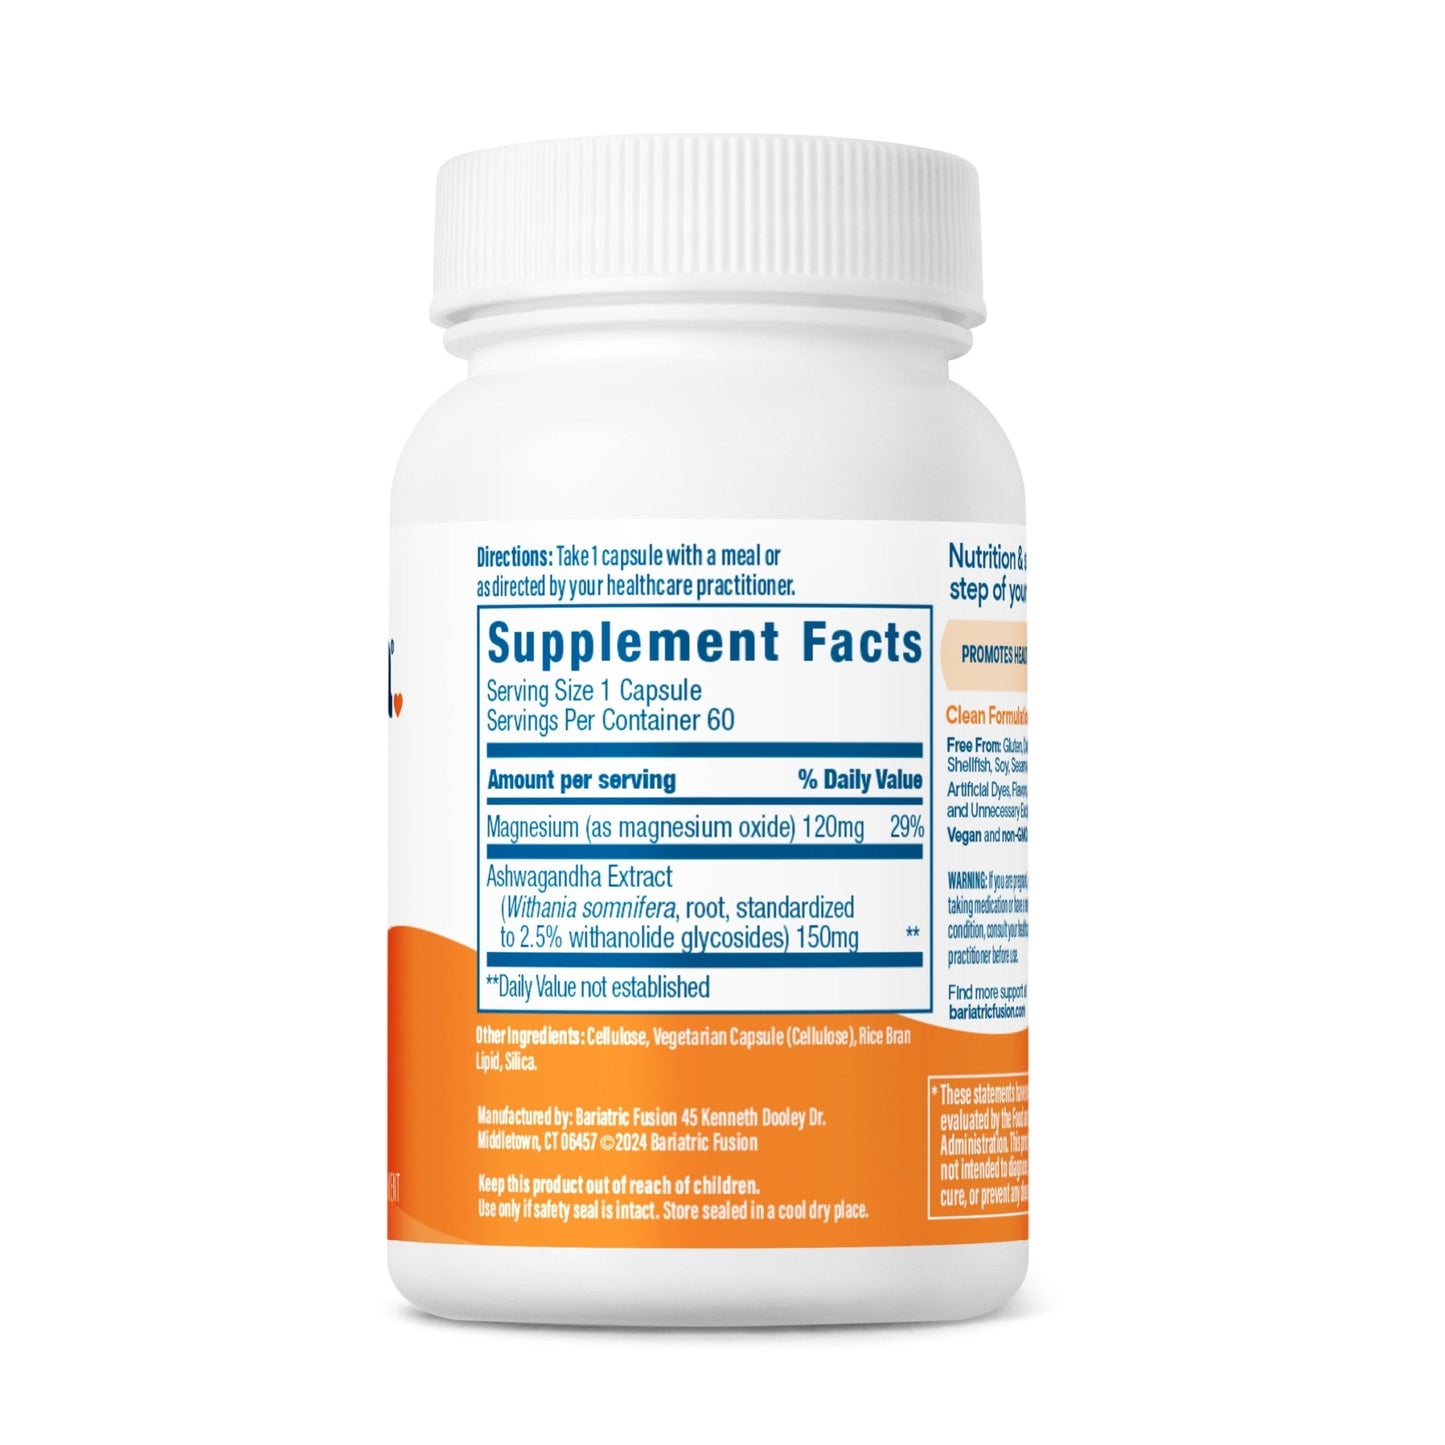 Bariatric Fusion Stress Support directions, servings, and ingredients.